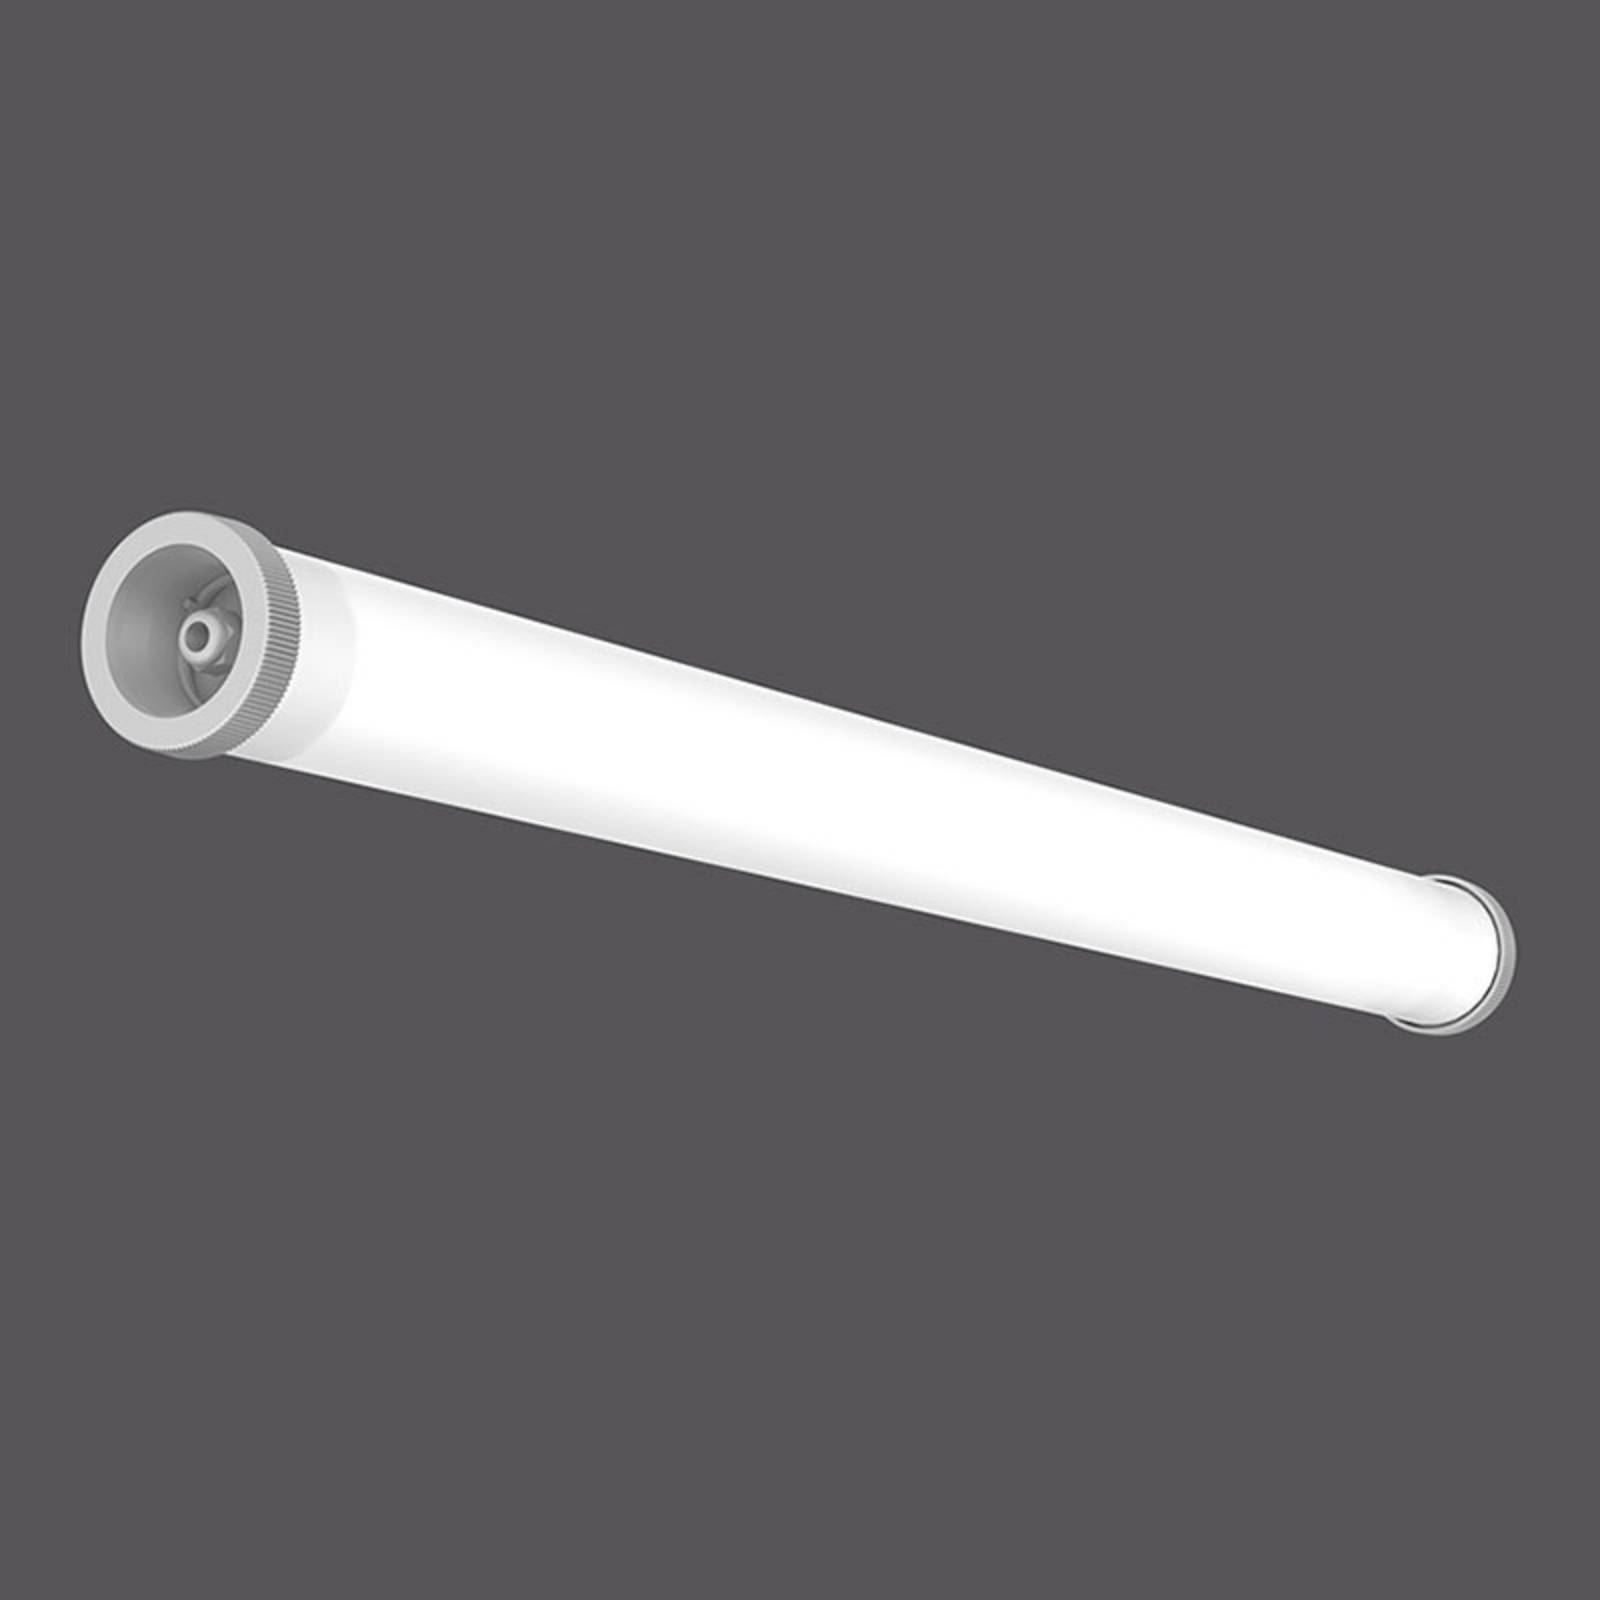 RZB Planox Tube lampe pce humide on/off 33W 96,5cm